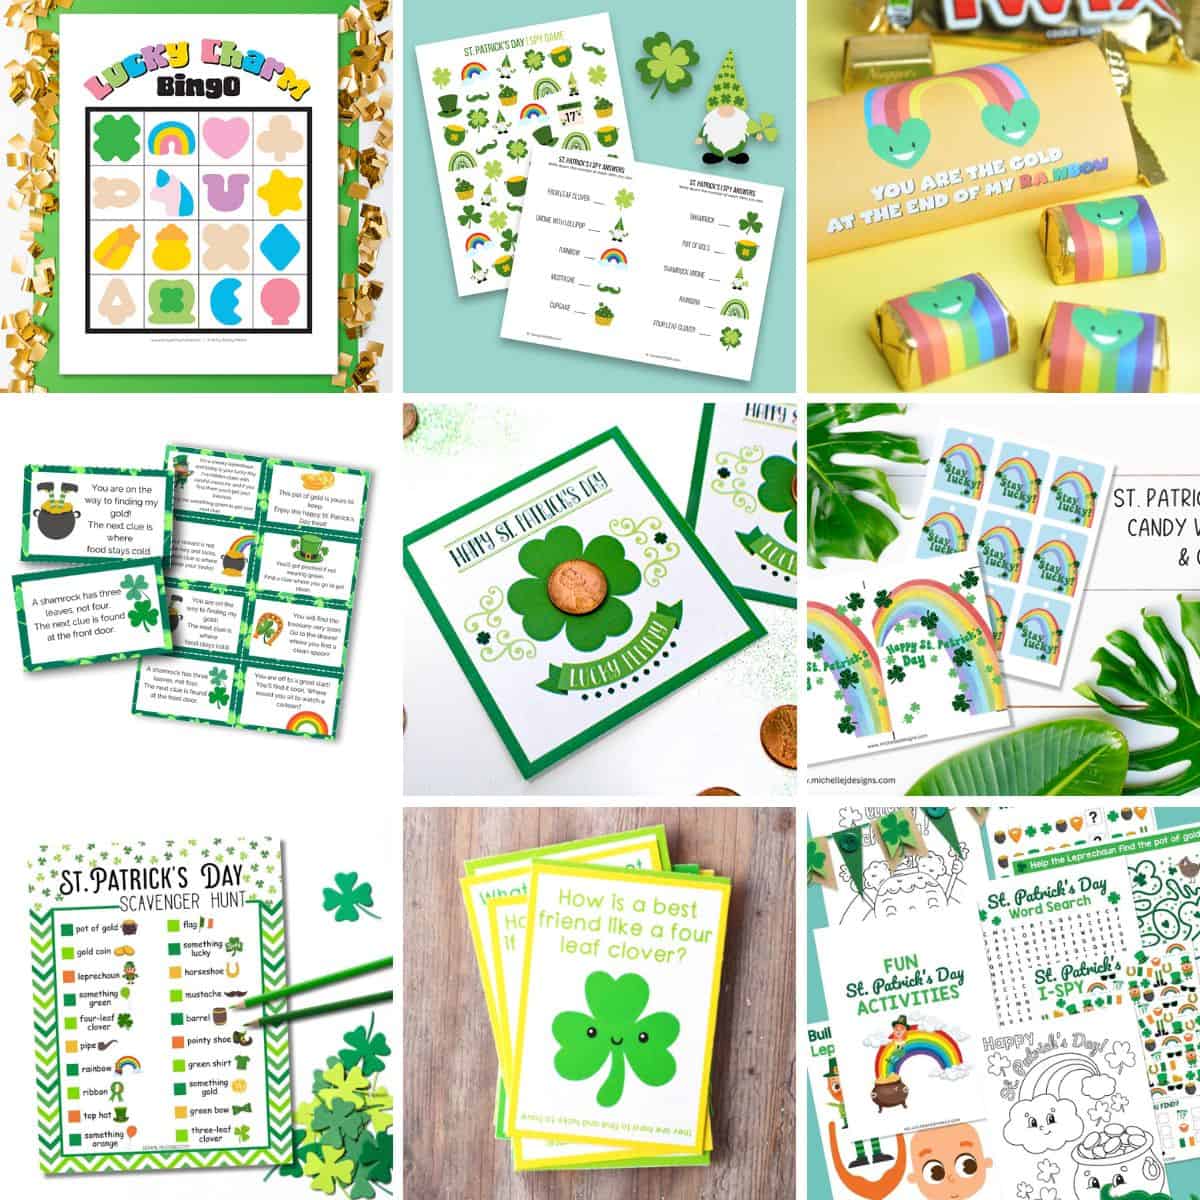 41 Free Printable St Patricks Day Crafts and Activities - TCBS